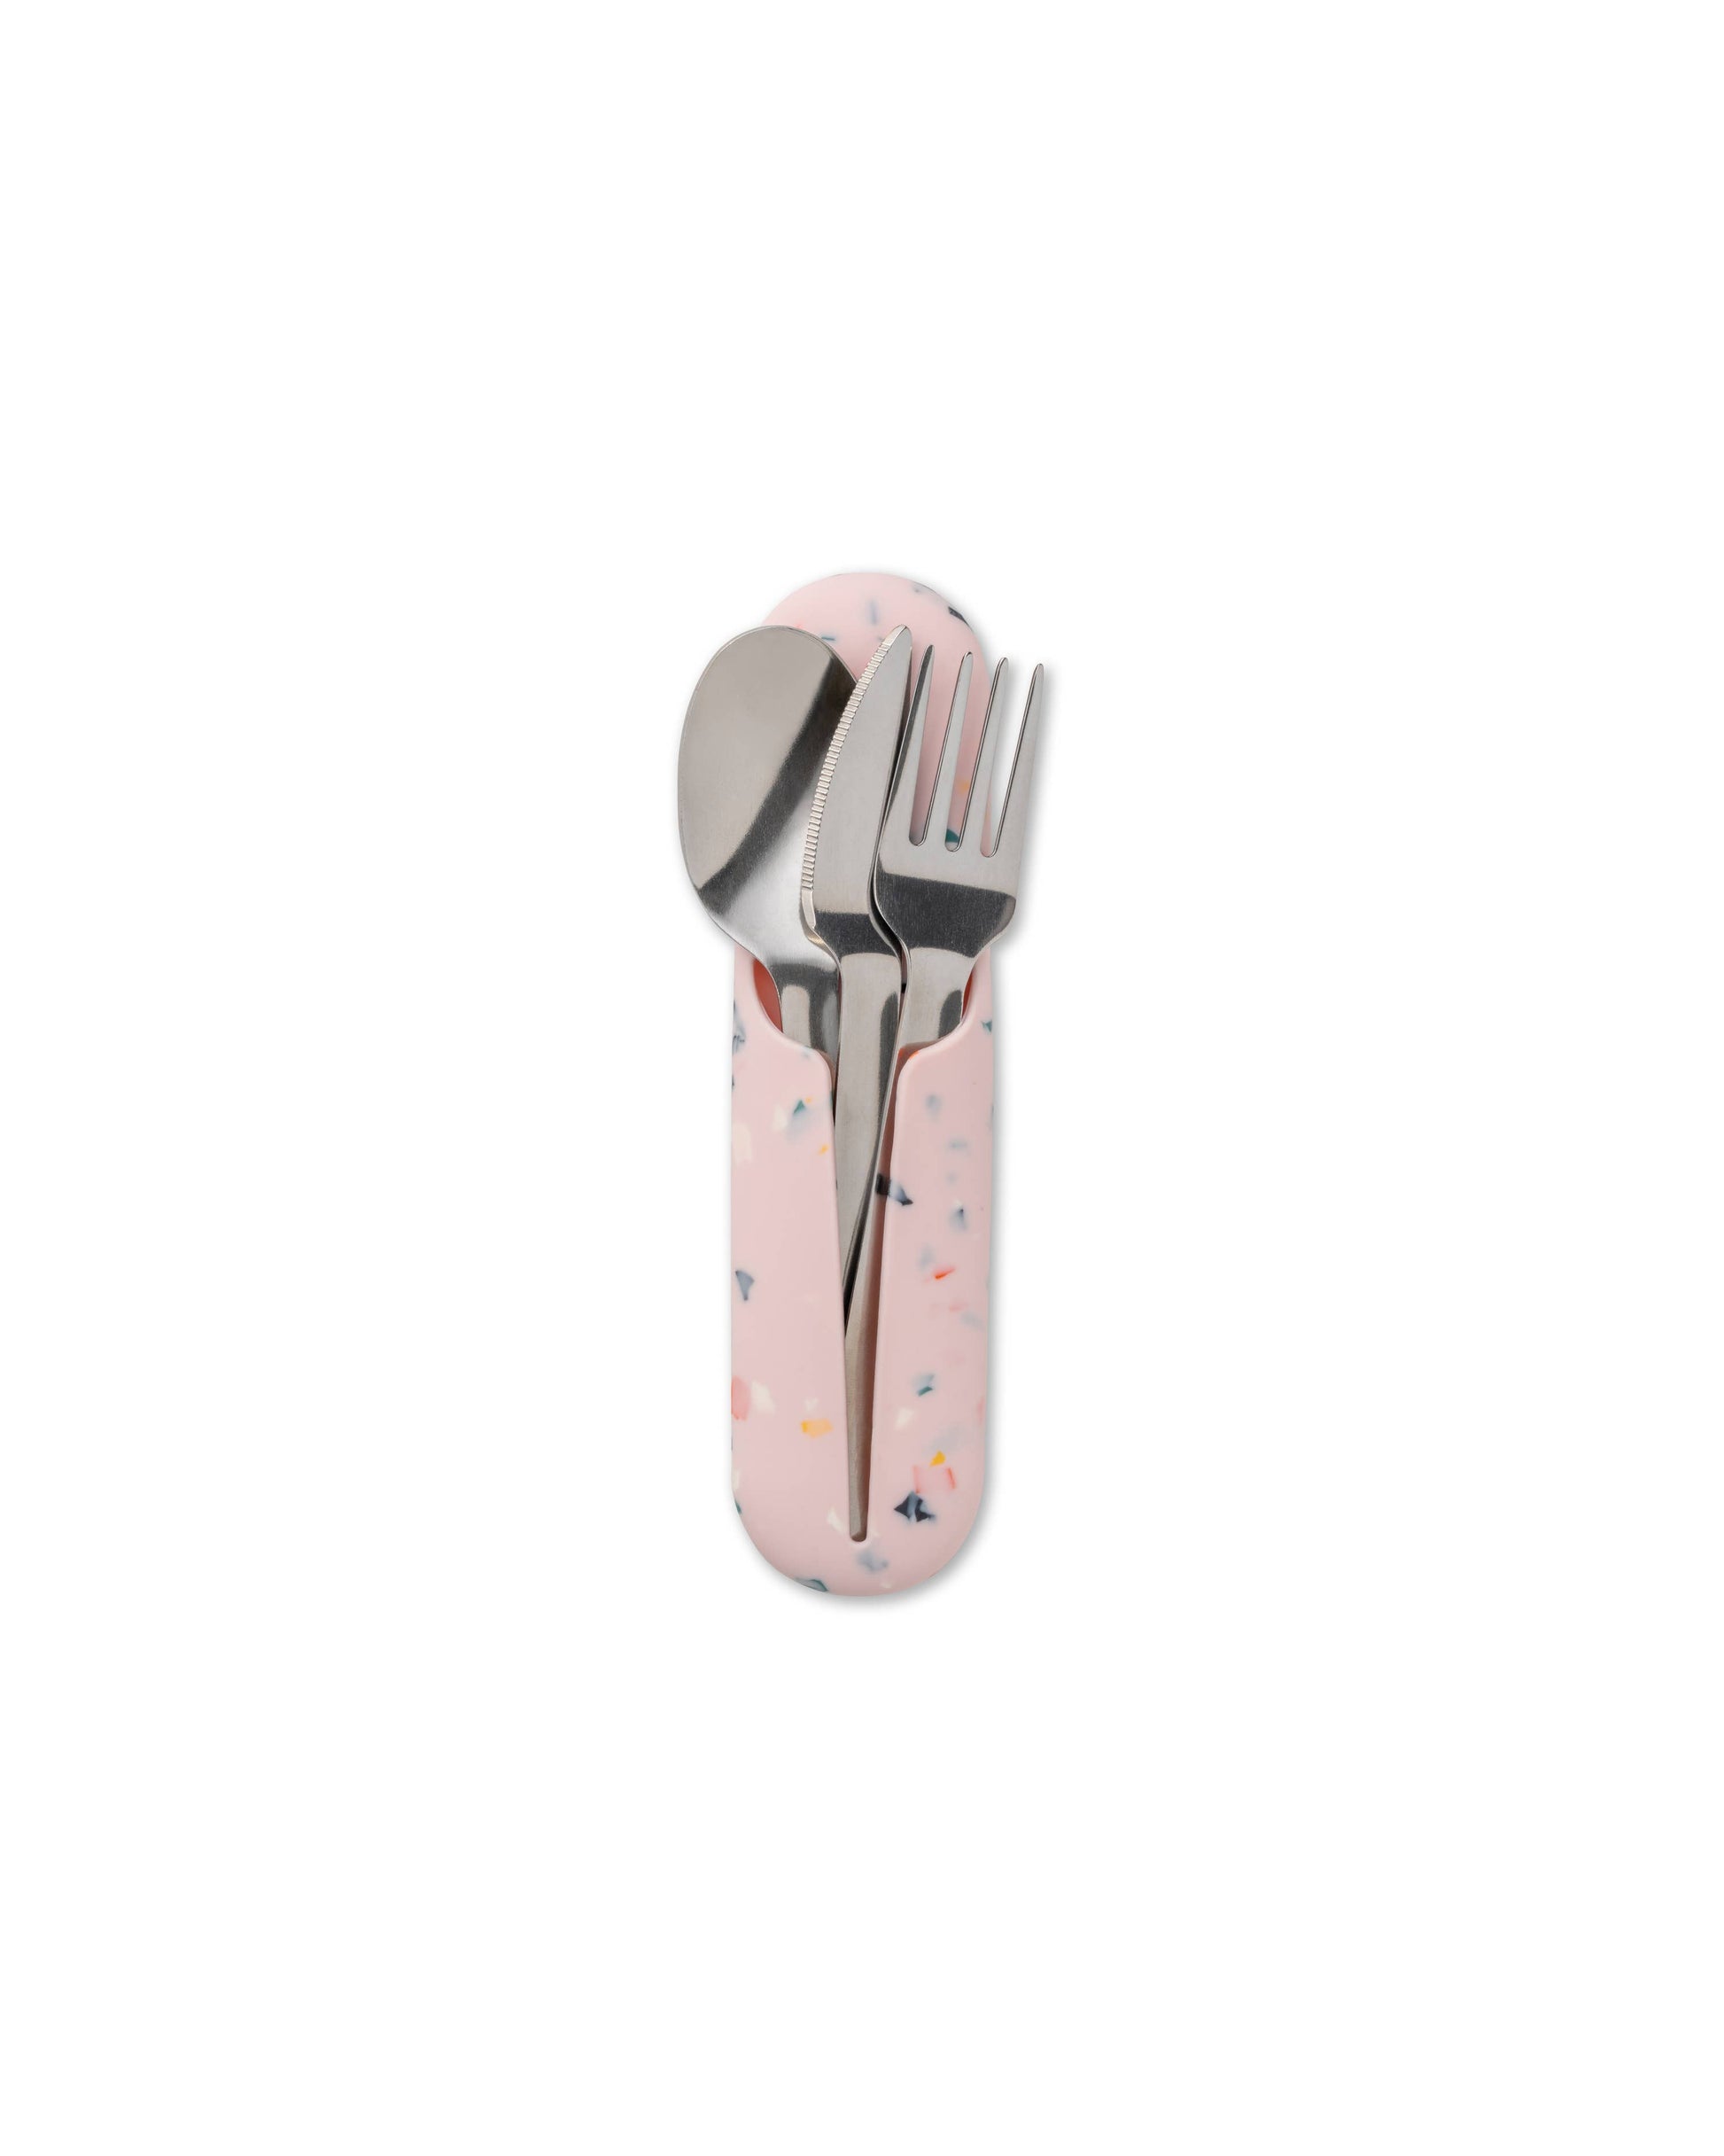 Porter Reusable Utensil Set in Silicone Case - Terrazzo  W&P Terrazzo Blush  -better made easy-eco-friendly-sustainable-gifting